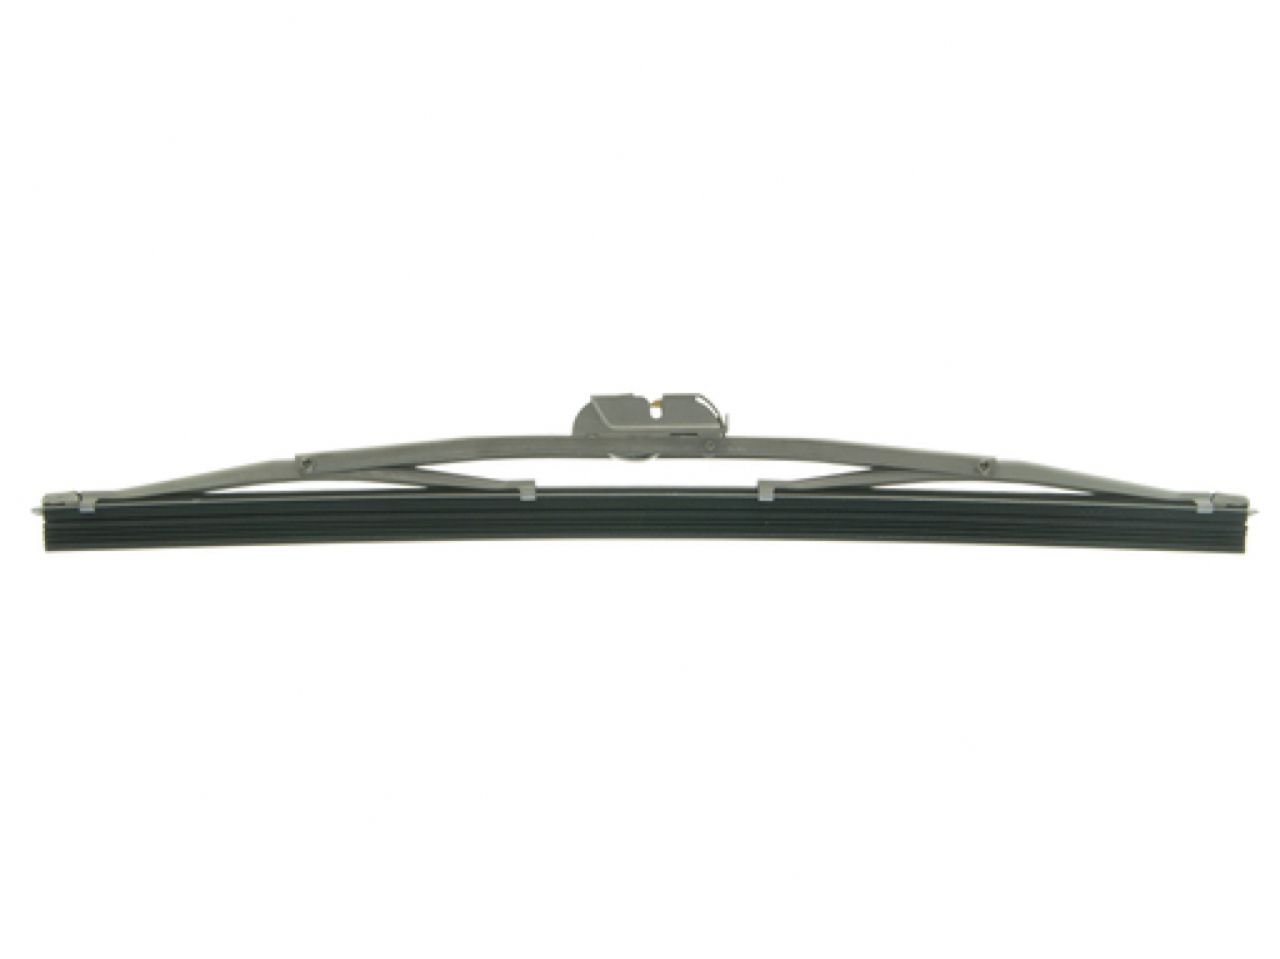 Anco Windshield Wipers 20-11 Item Image